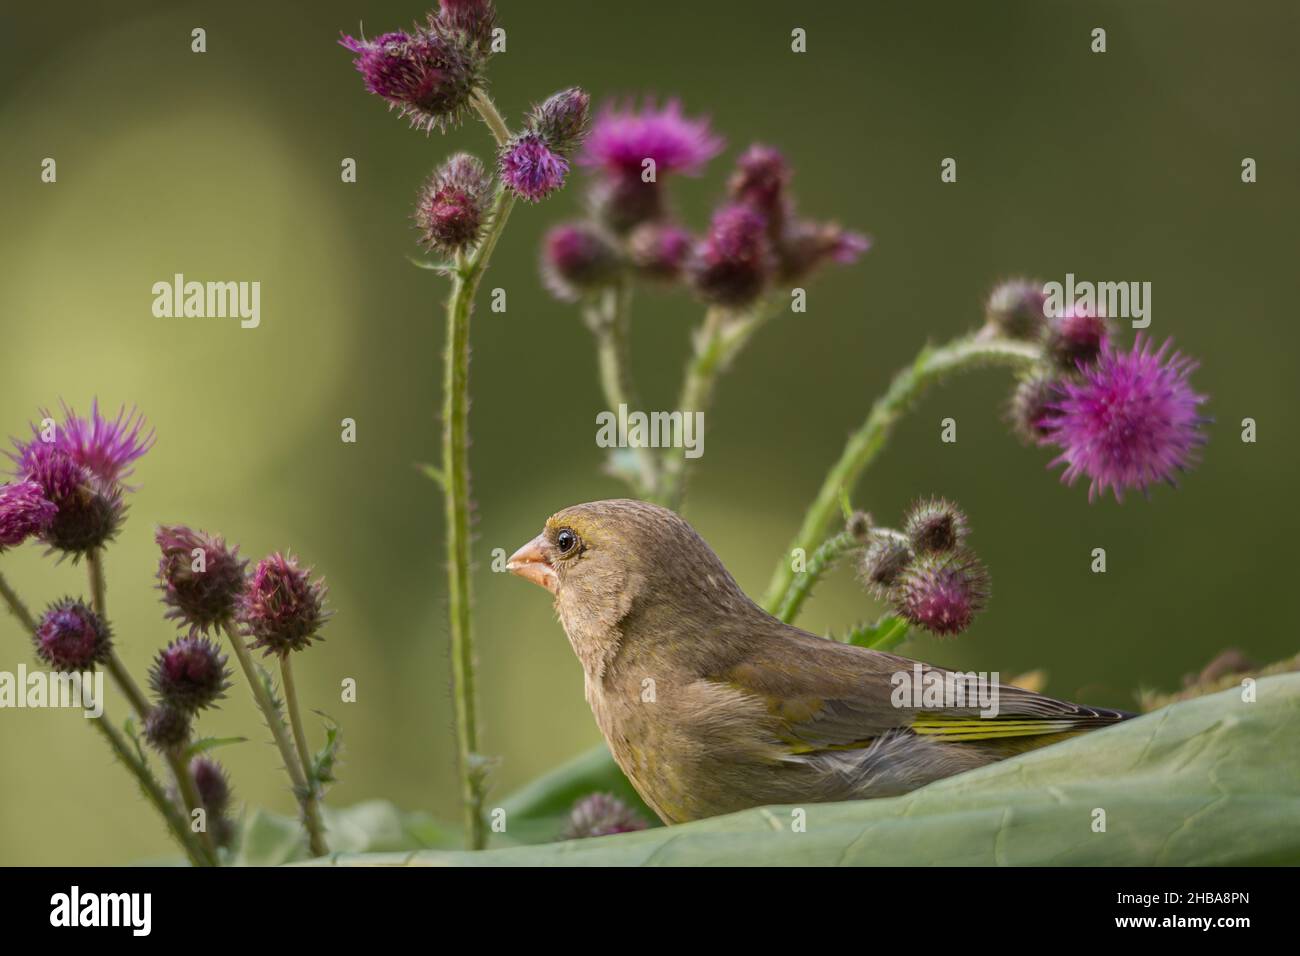 greenfinch is standing in front of flowers Stock Photo